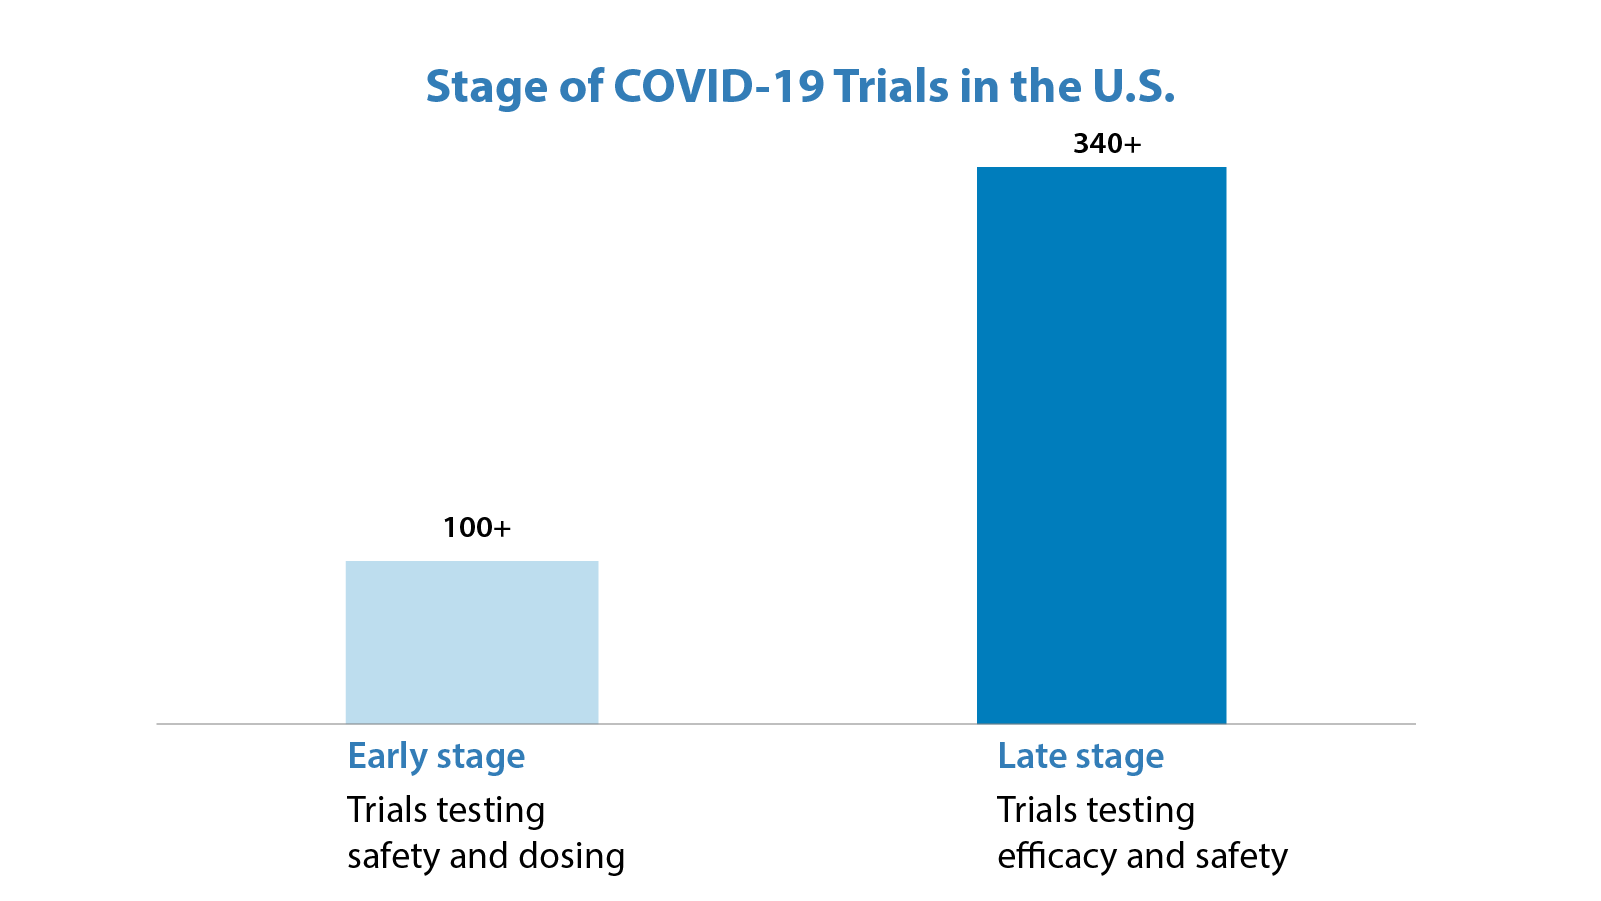 Stage of COVID-19 Trials in the U.S - 100+ Early stage Trials testing safety and dosing; 340+ Late stage efficacy and safety